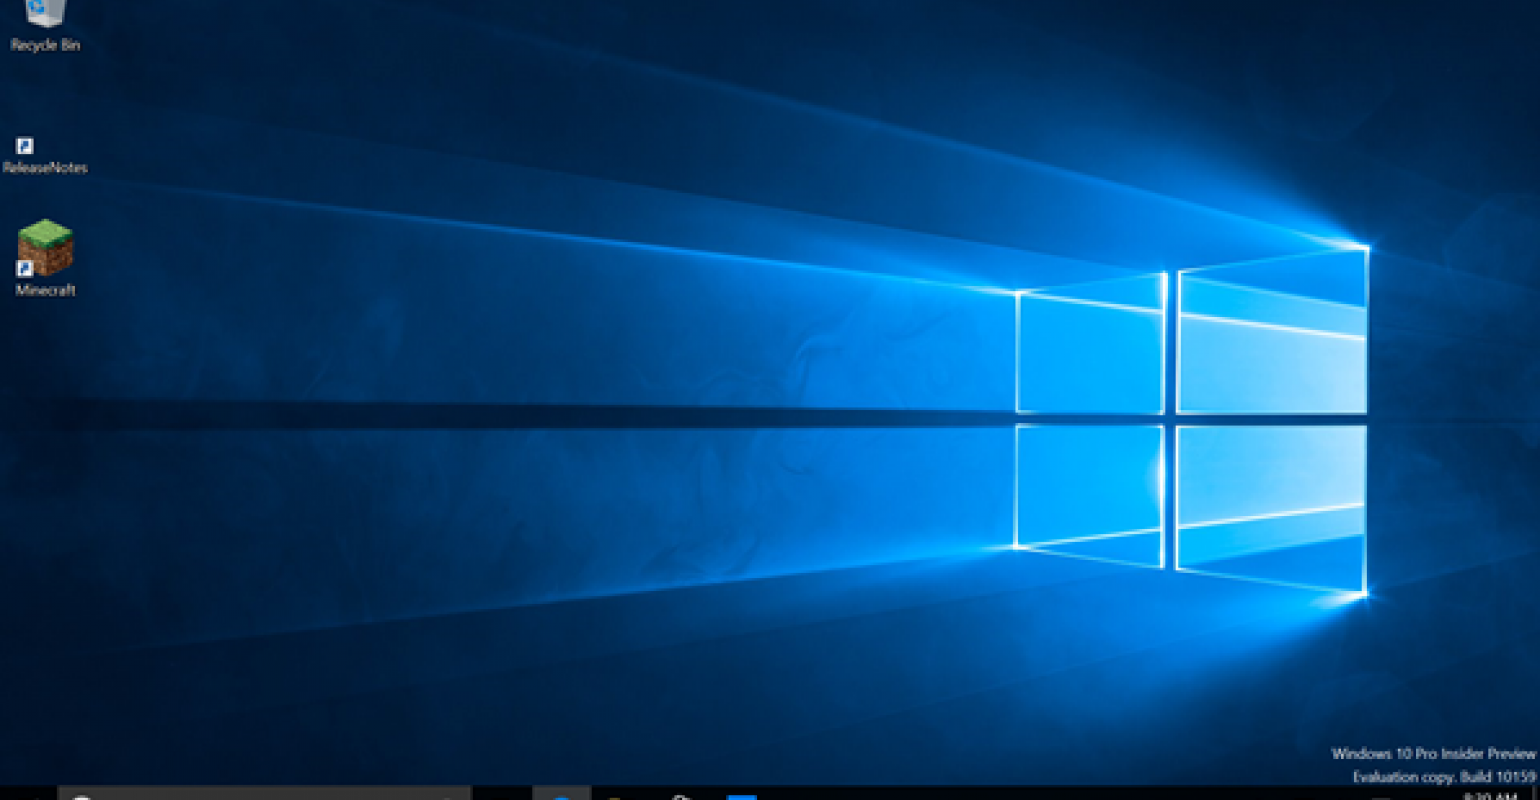 How To Turn The Desktop Background Image On And Off In Windows